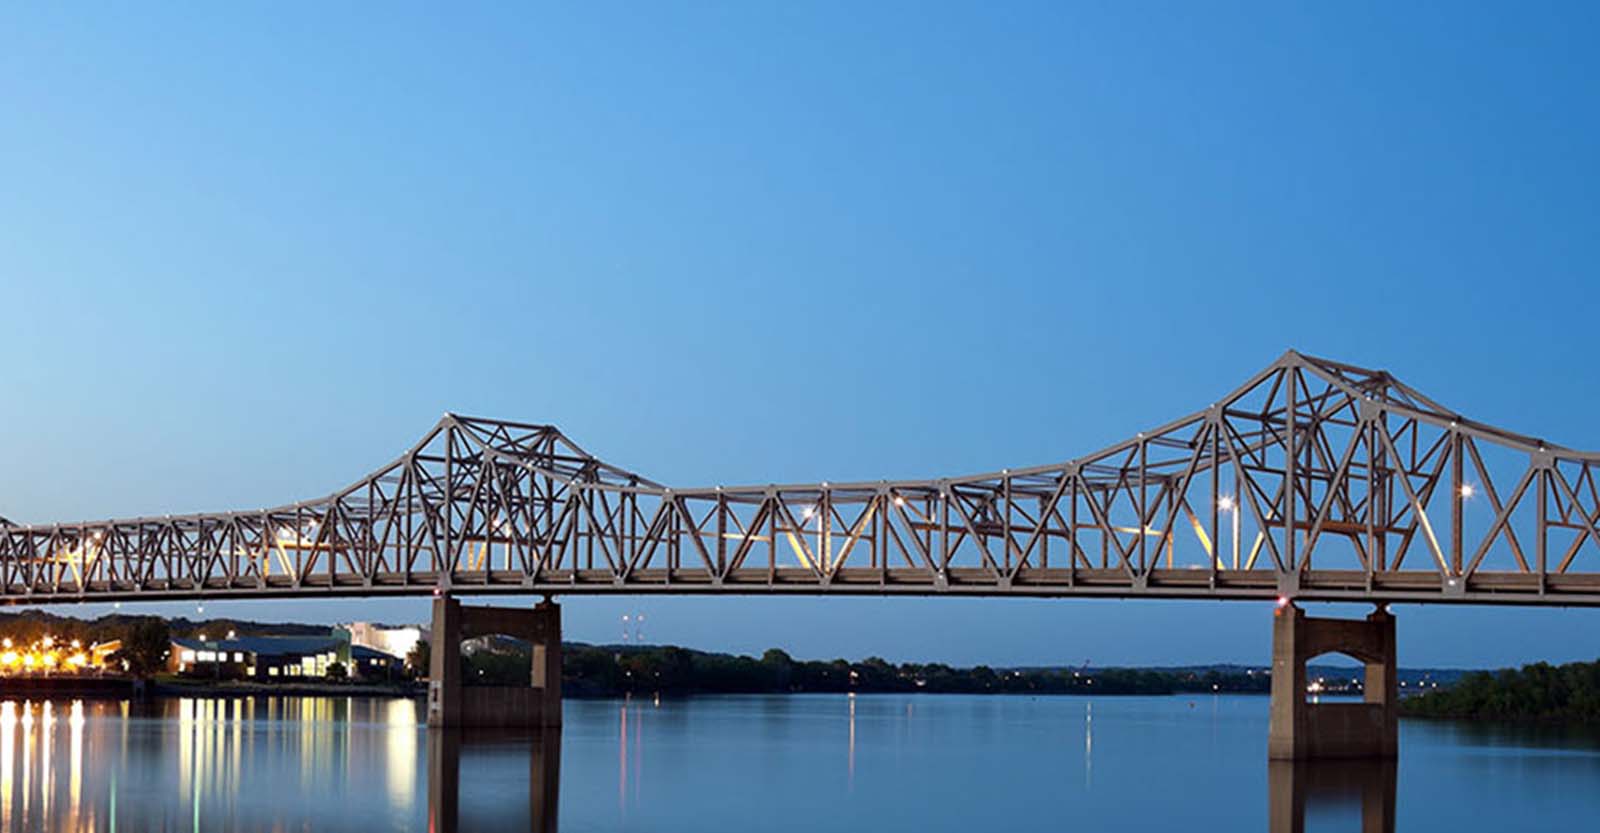 Blue sky with the Peoria Bridge spanning over a river